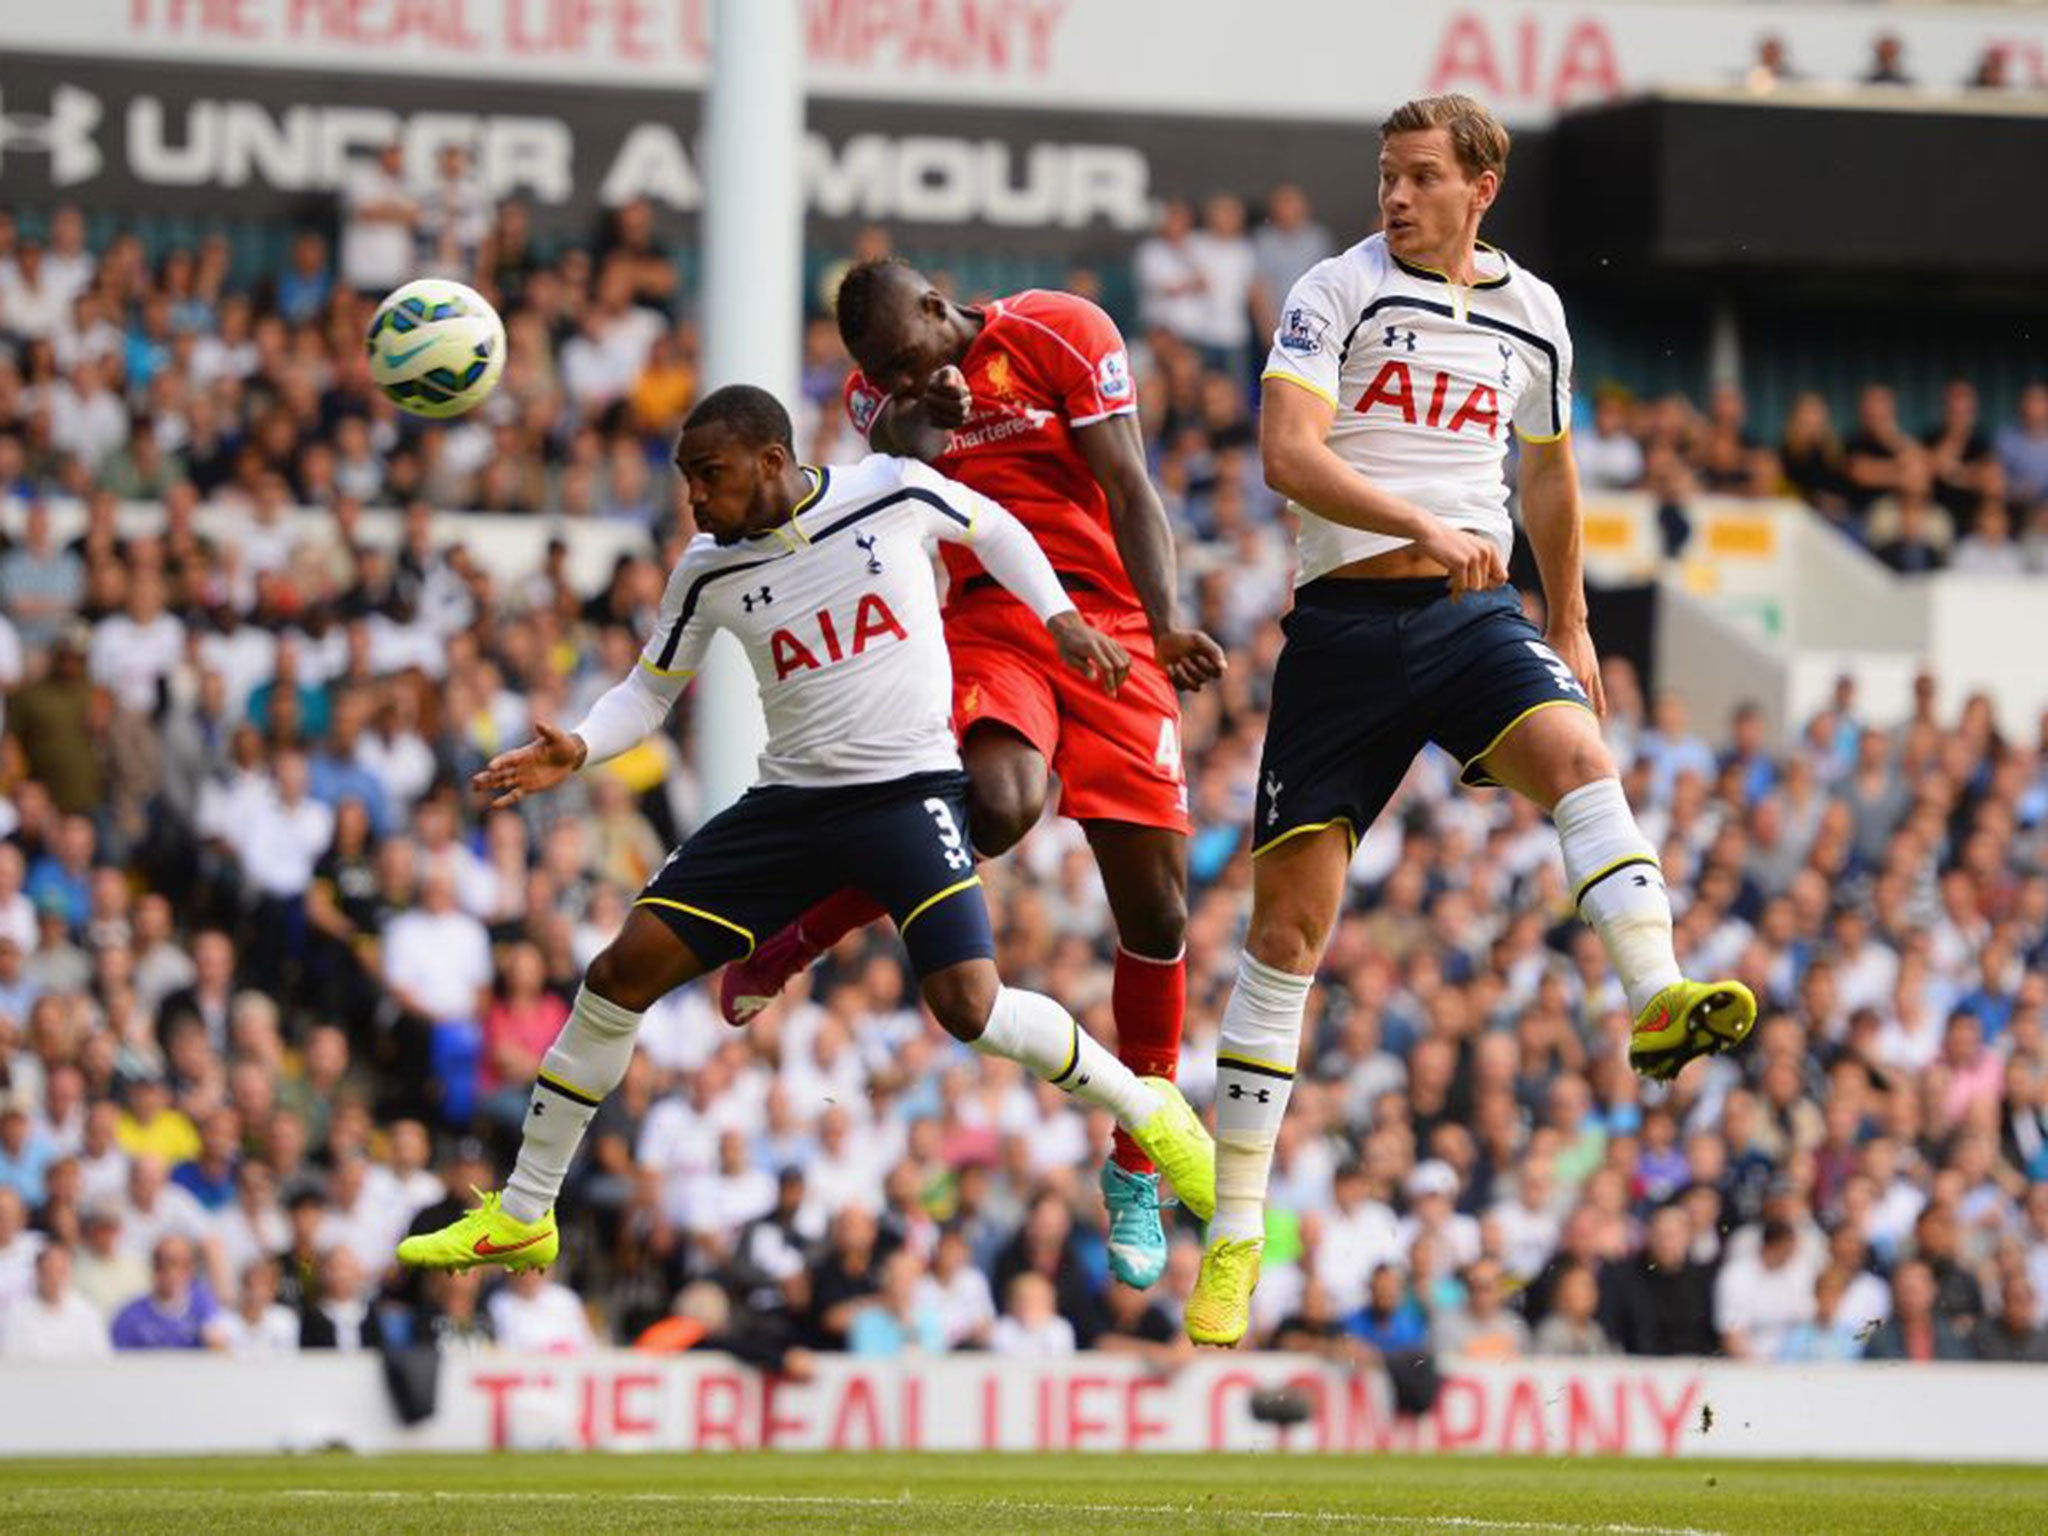 Mario Balotelli has an early header on goal during his Liverpool debut against Tottenham